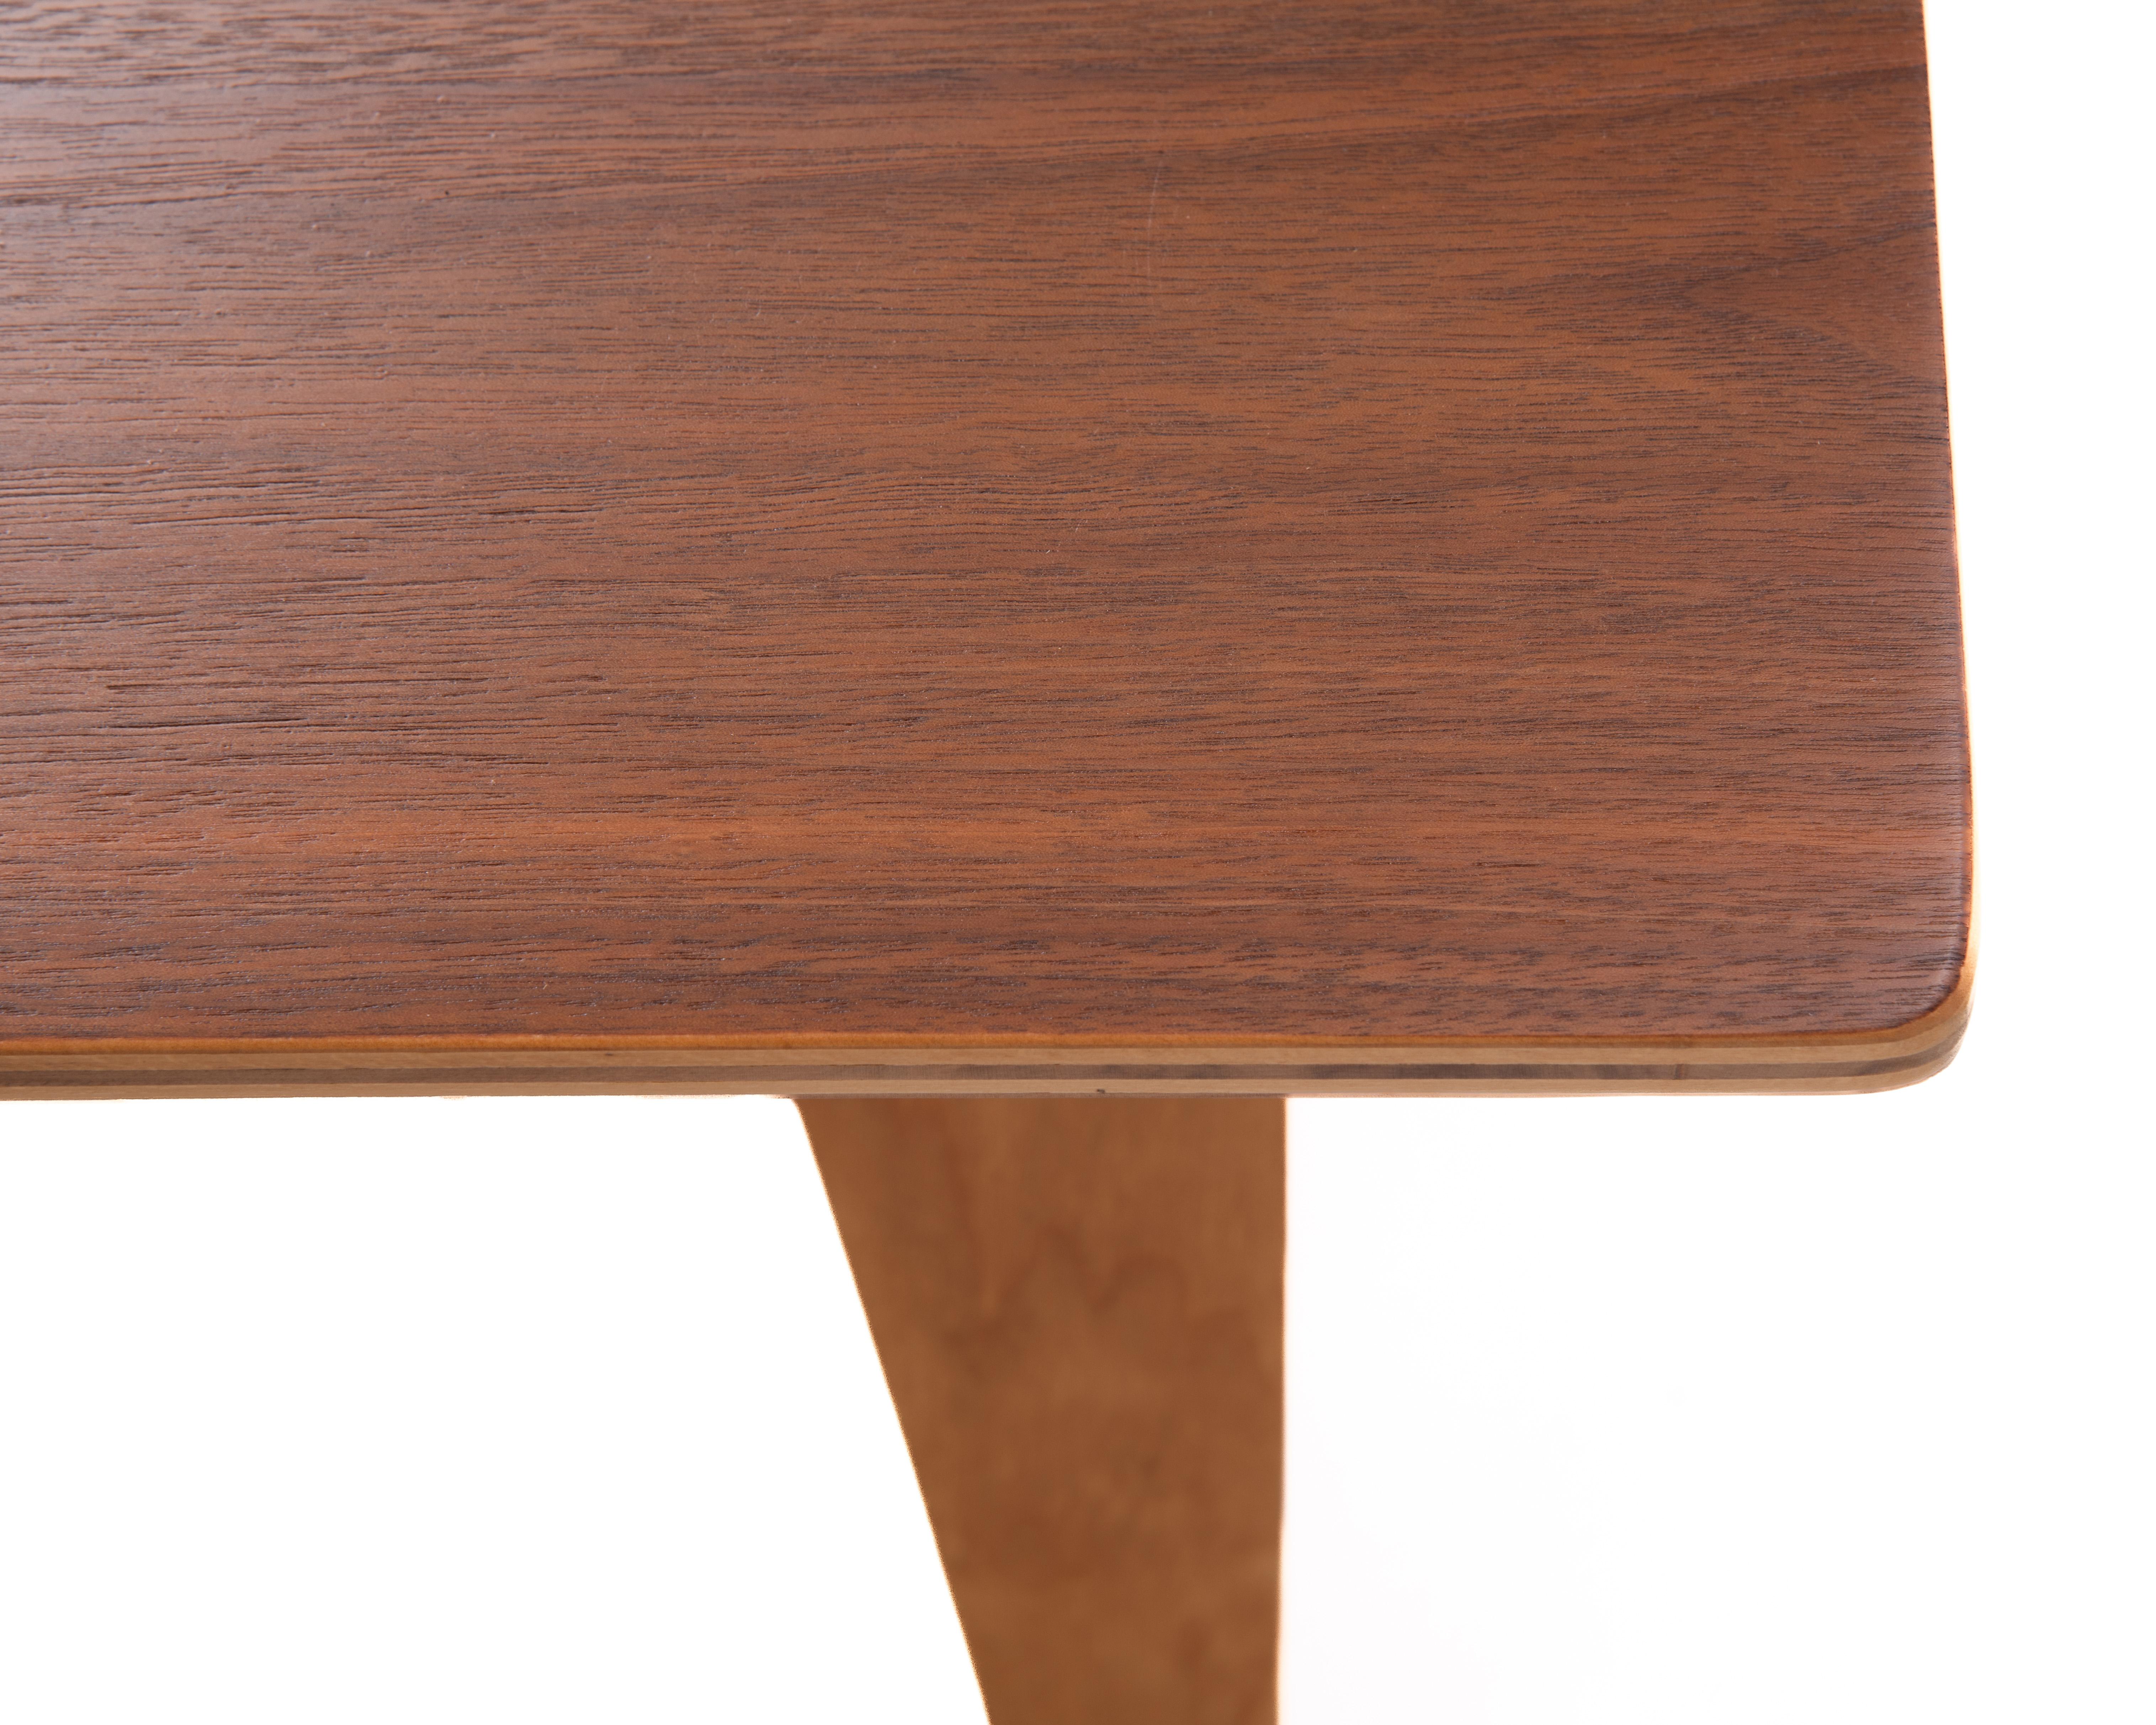 Charles Ray Eames Evans Plywood Company CTW1 OTW Oblong Table Wood Walnut Birch For Sale 9